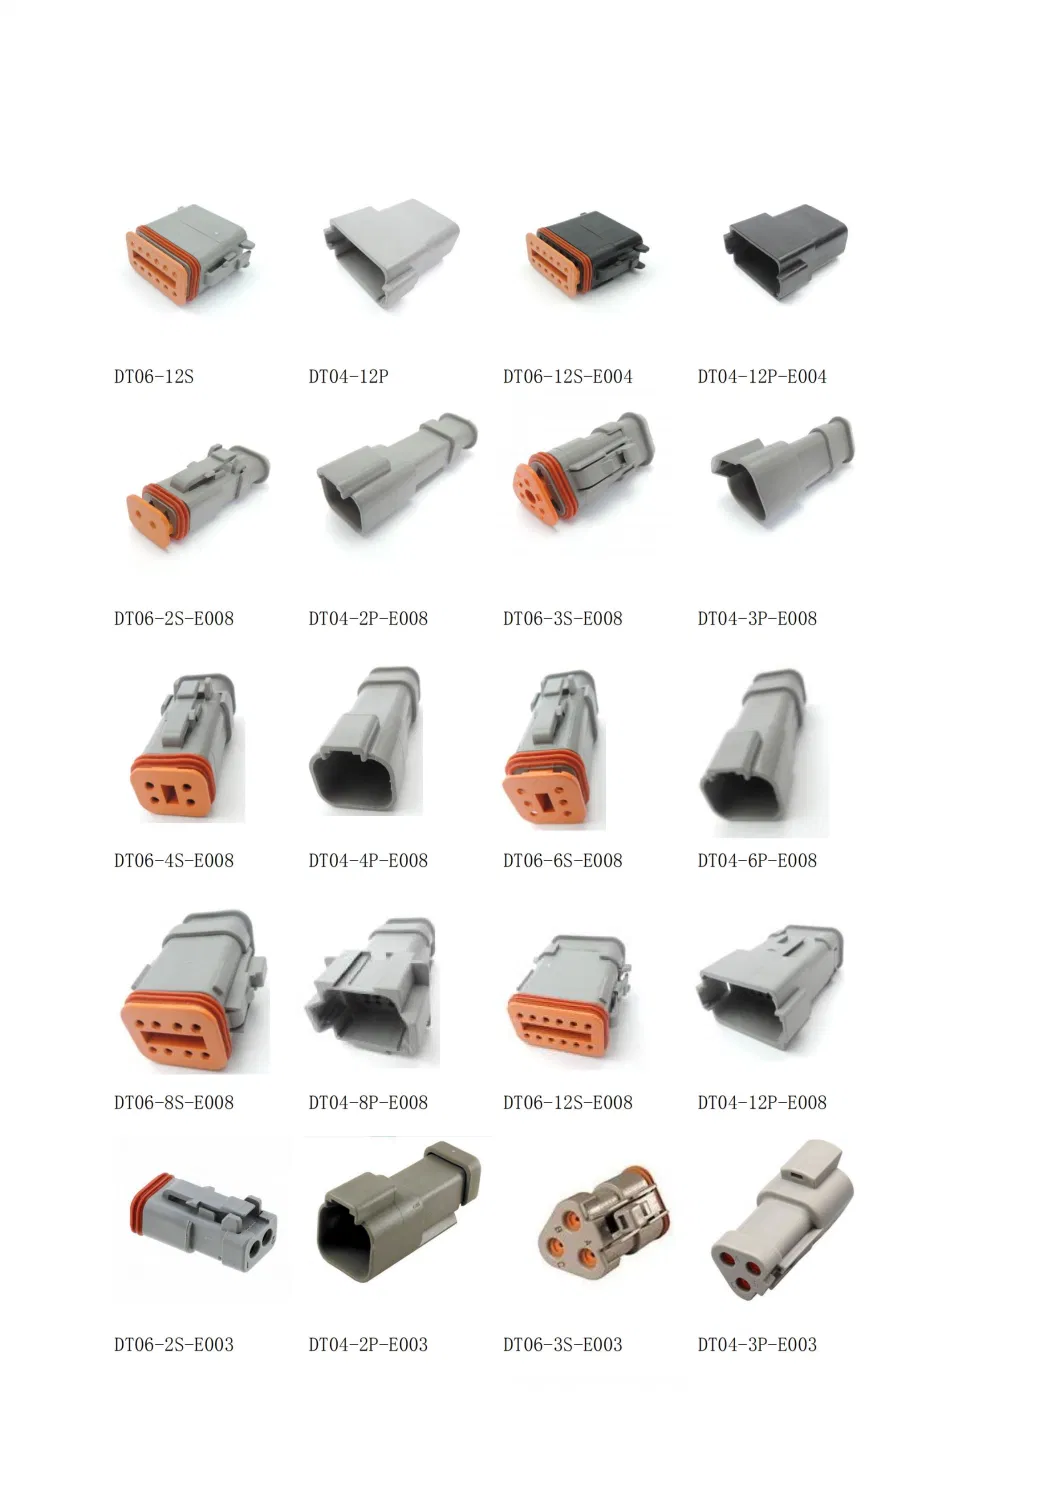 Deutsch 1 Pin Way Female Male Housing Adapter PA66 Waterproof Automotive Wire Connector Plug Dthd06-1-8s Dthd04-1-8p Dthd04-1-12p Dthd04-1-4p